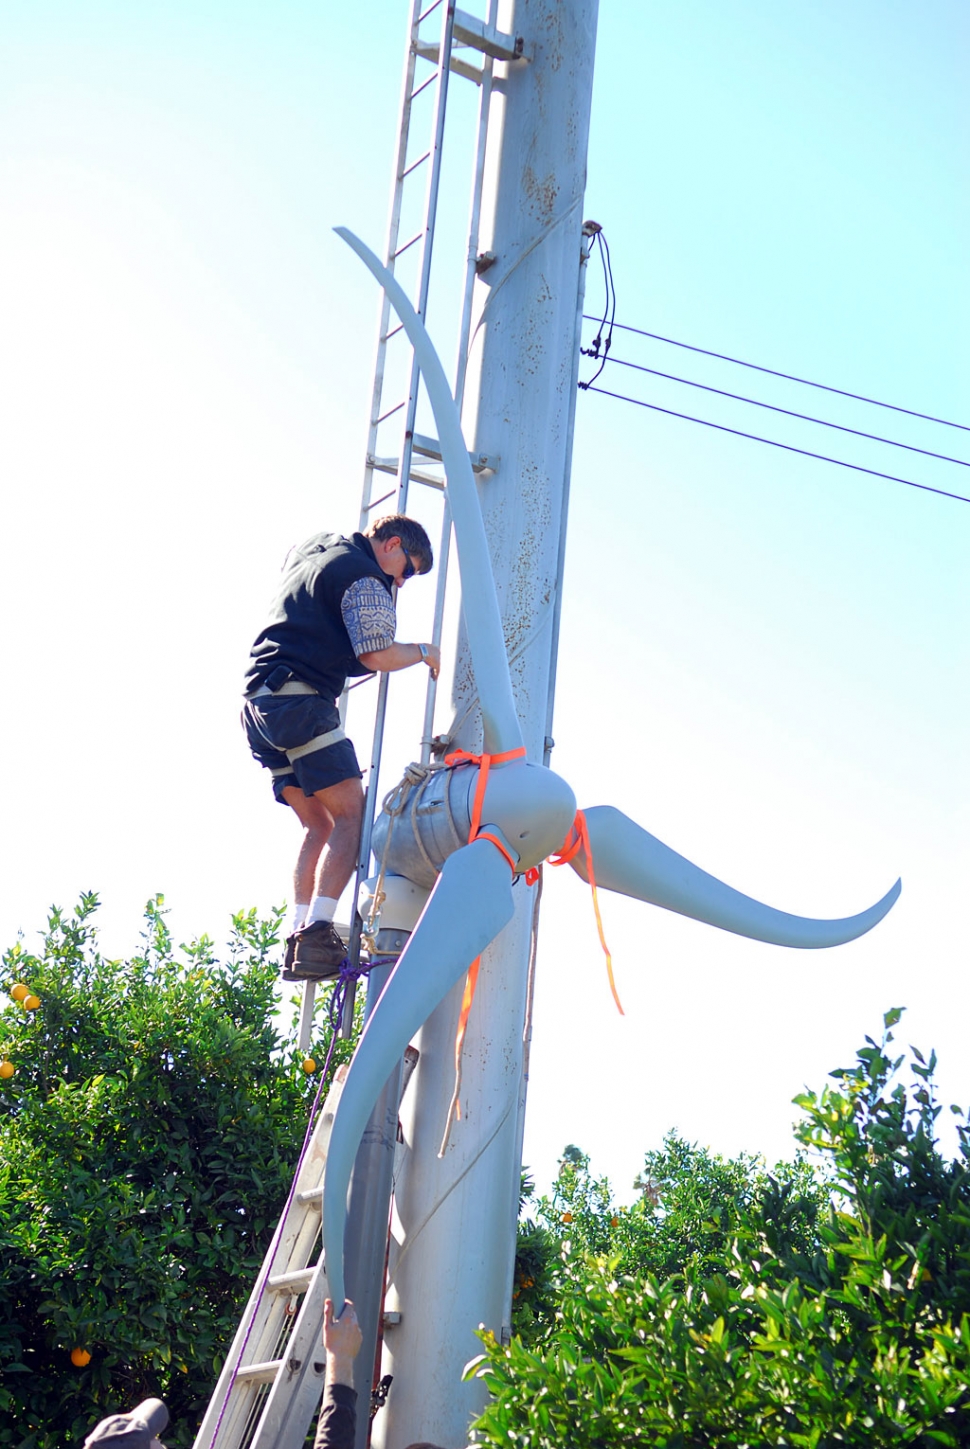 Installation of a new wind generator takes place under the watchful eyes of local farmer Bob Hammond. Converting his old orchard wind machine is expected to produce up to 500 kilowatts per month for the Hammond household. This is about as green as it gets.